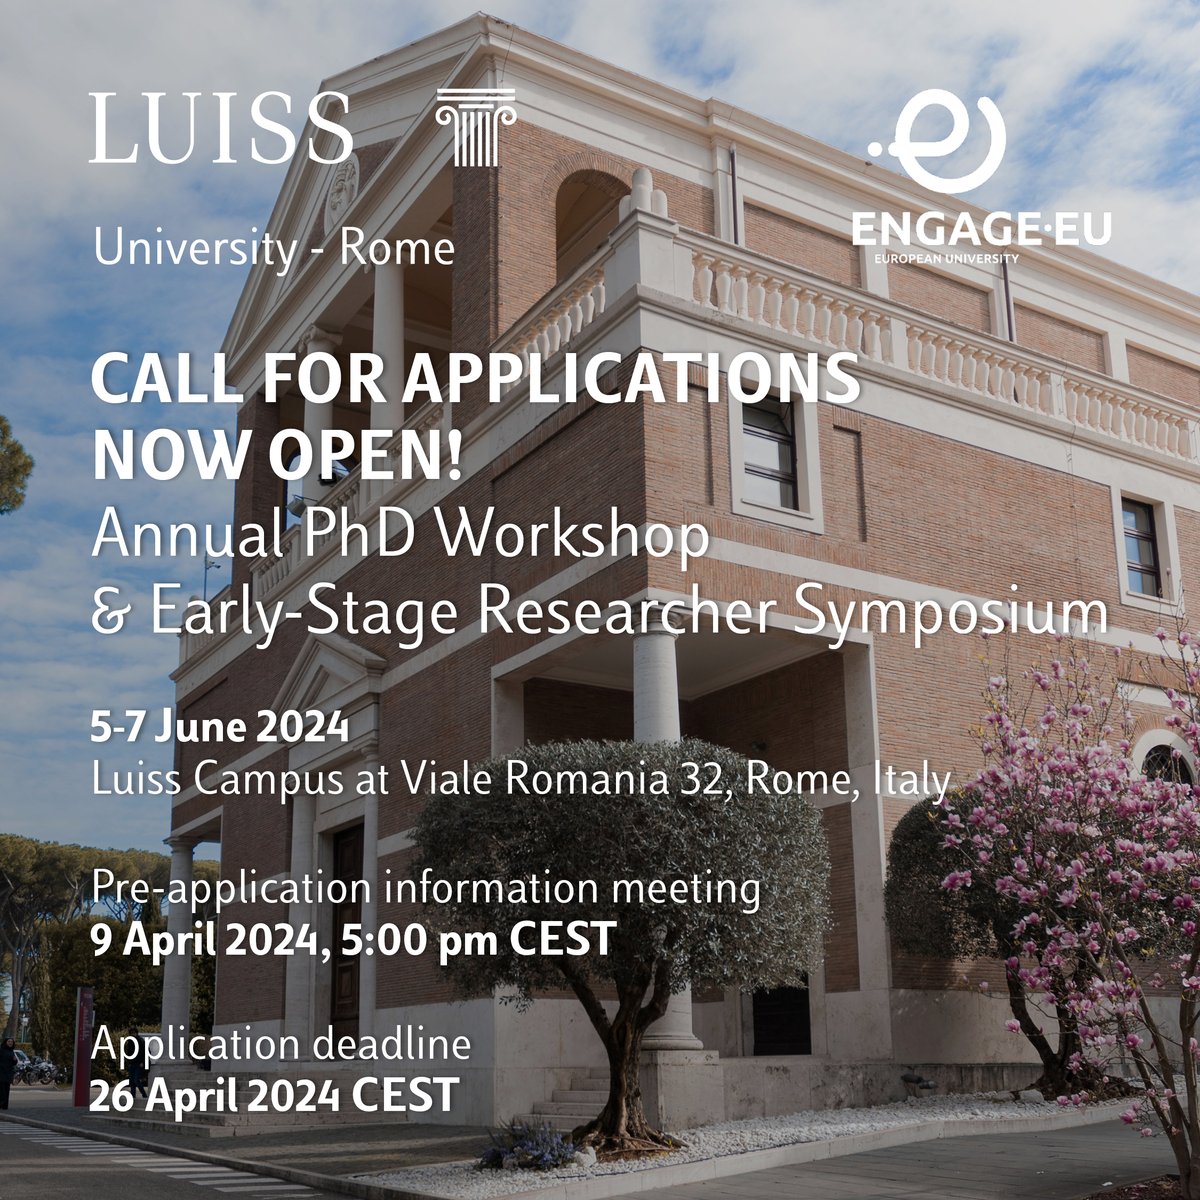 📣 To all PhD Students and early-stage researchers (up to 4 years after the PhD)! You still have time to join us for a 3-day workshop & symposium at Luiss University in Rome, from June 5-7, 2024. 🗓️ Deadline for application: 26.04 2024 🔗Find more at shorturl.at/nvyEP